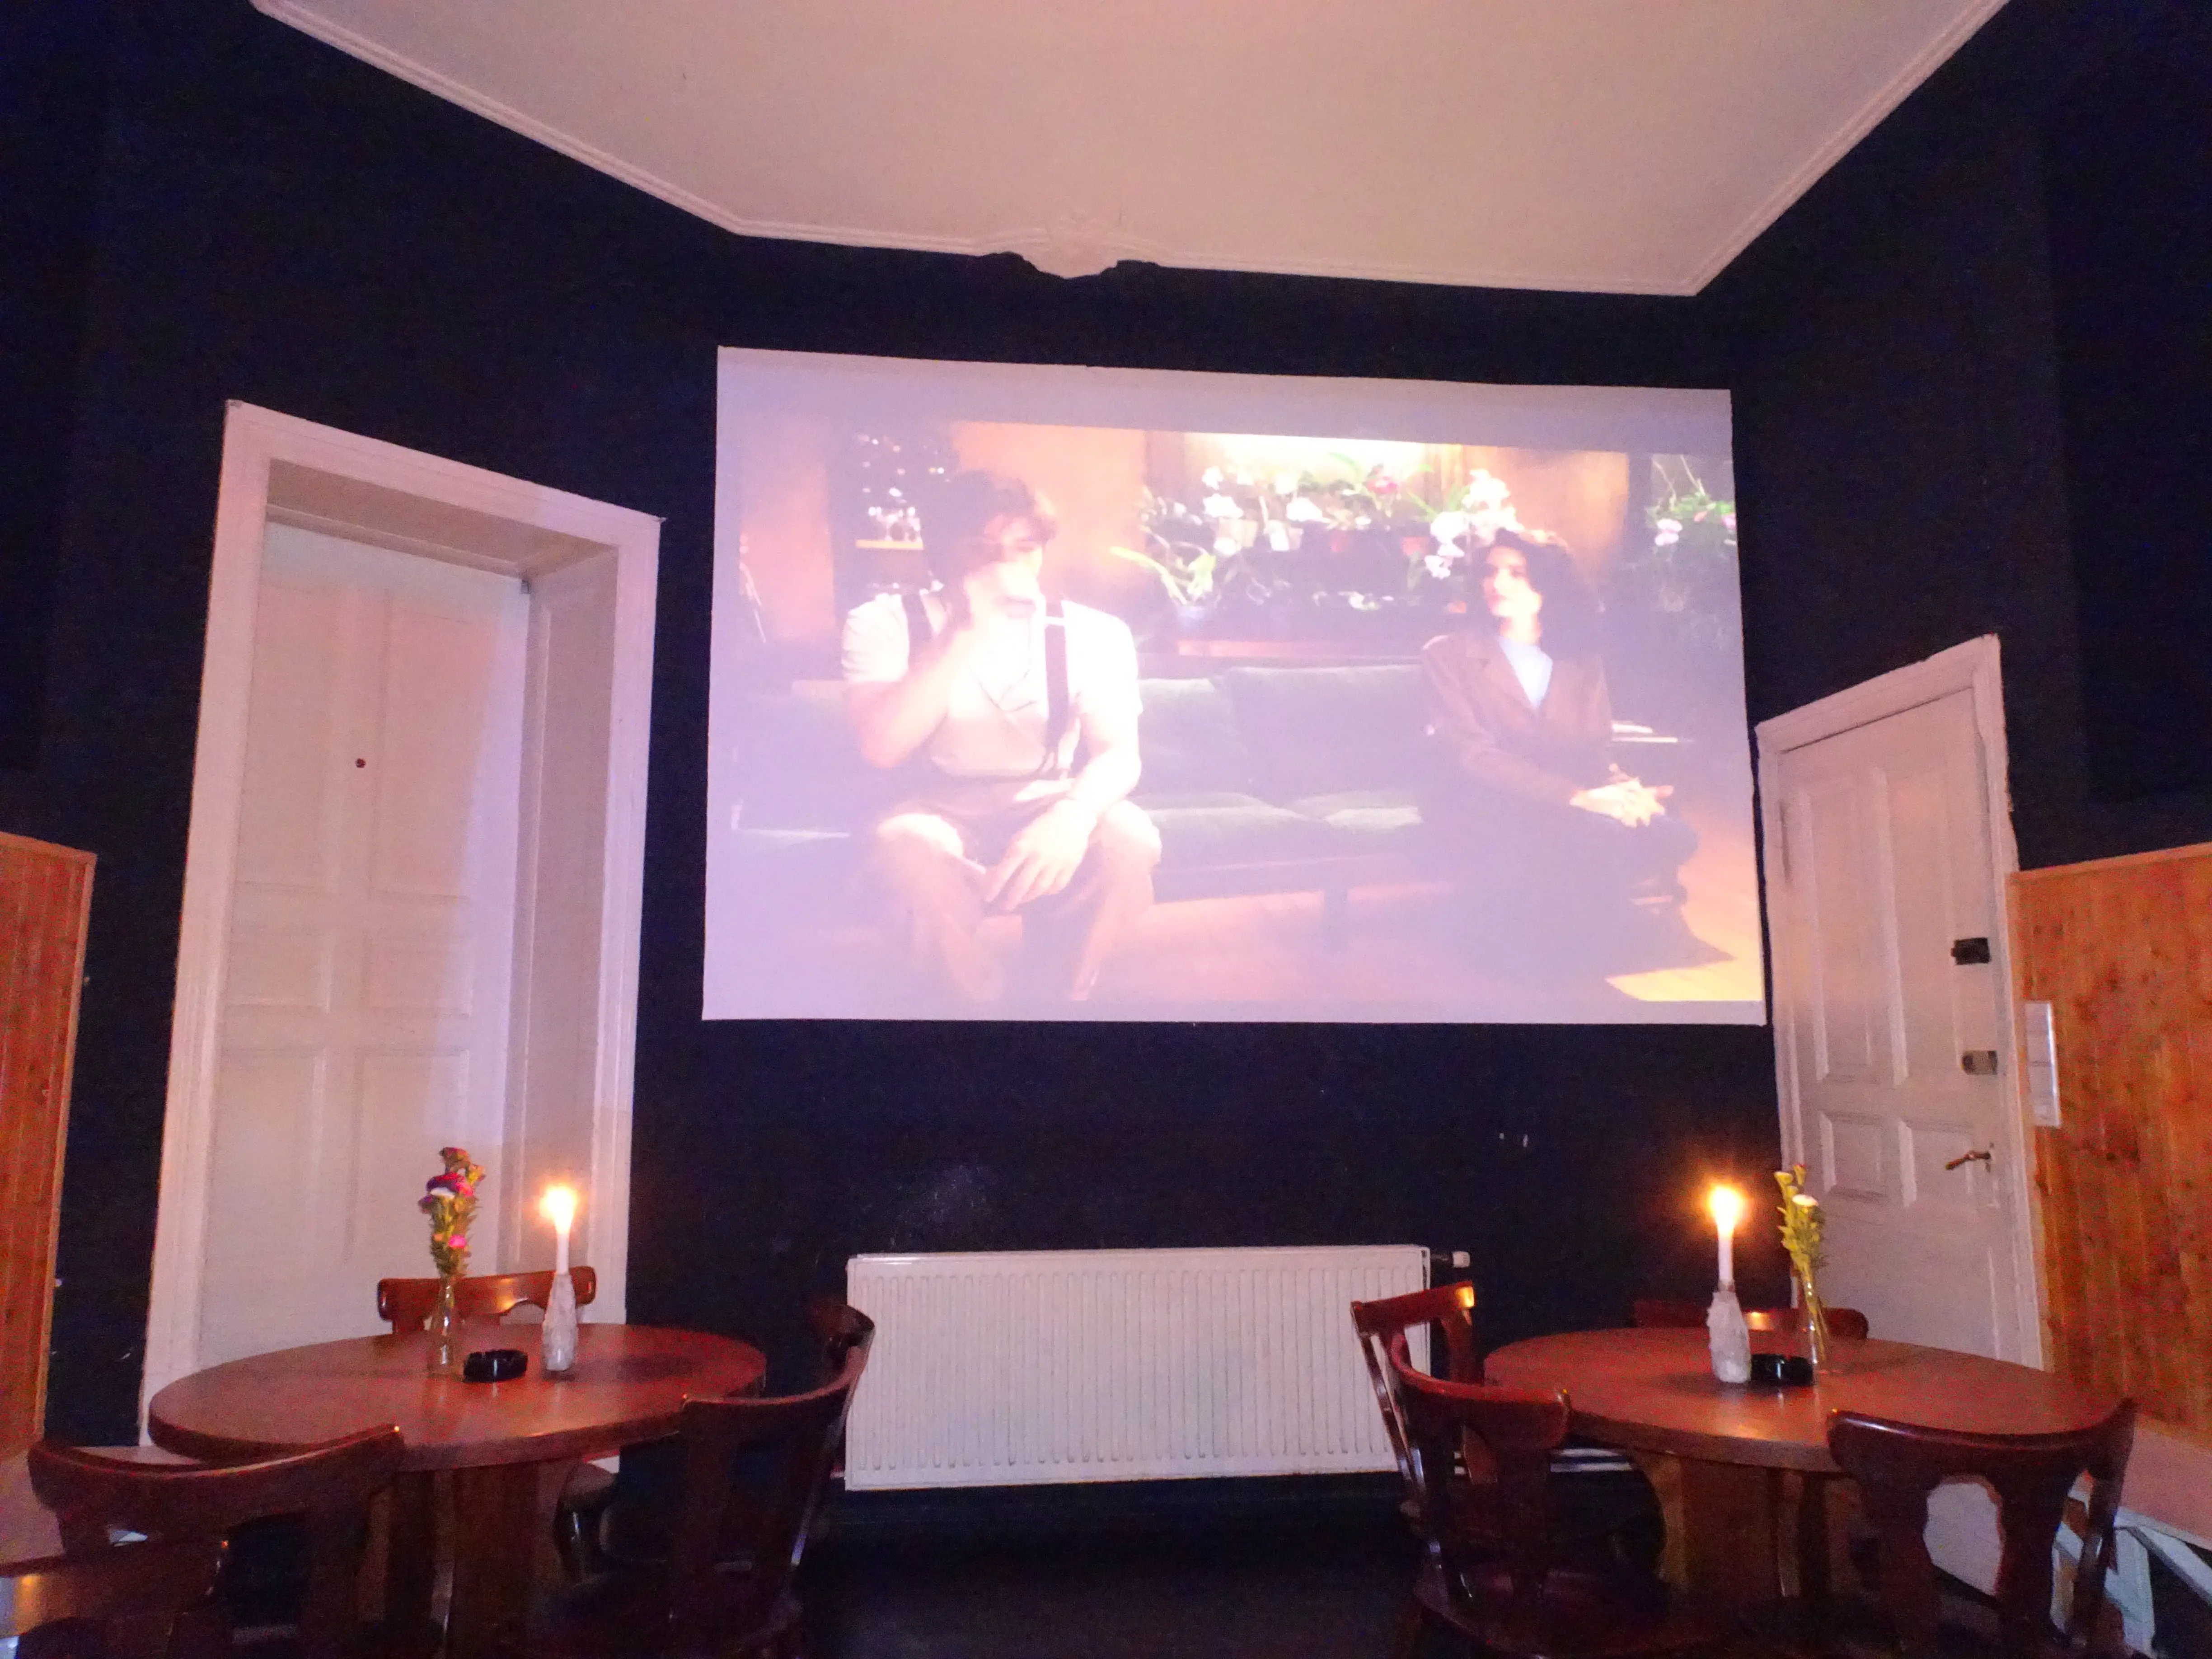 A screen hanging in a restaurant with a movie scene projected on it